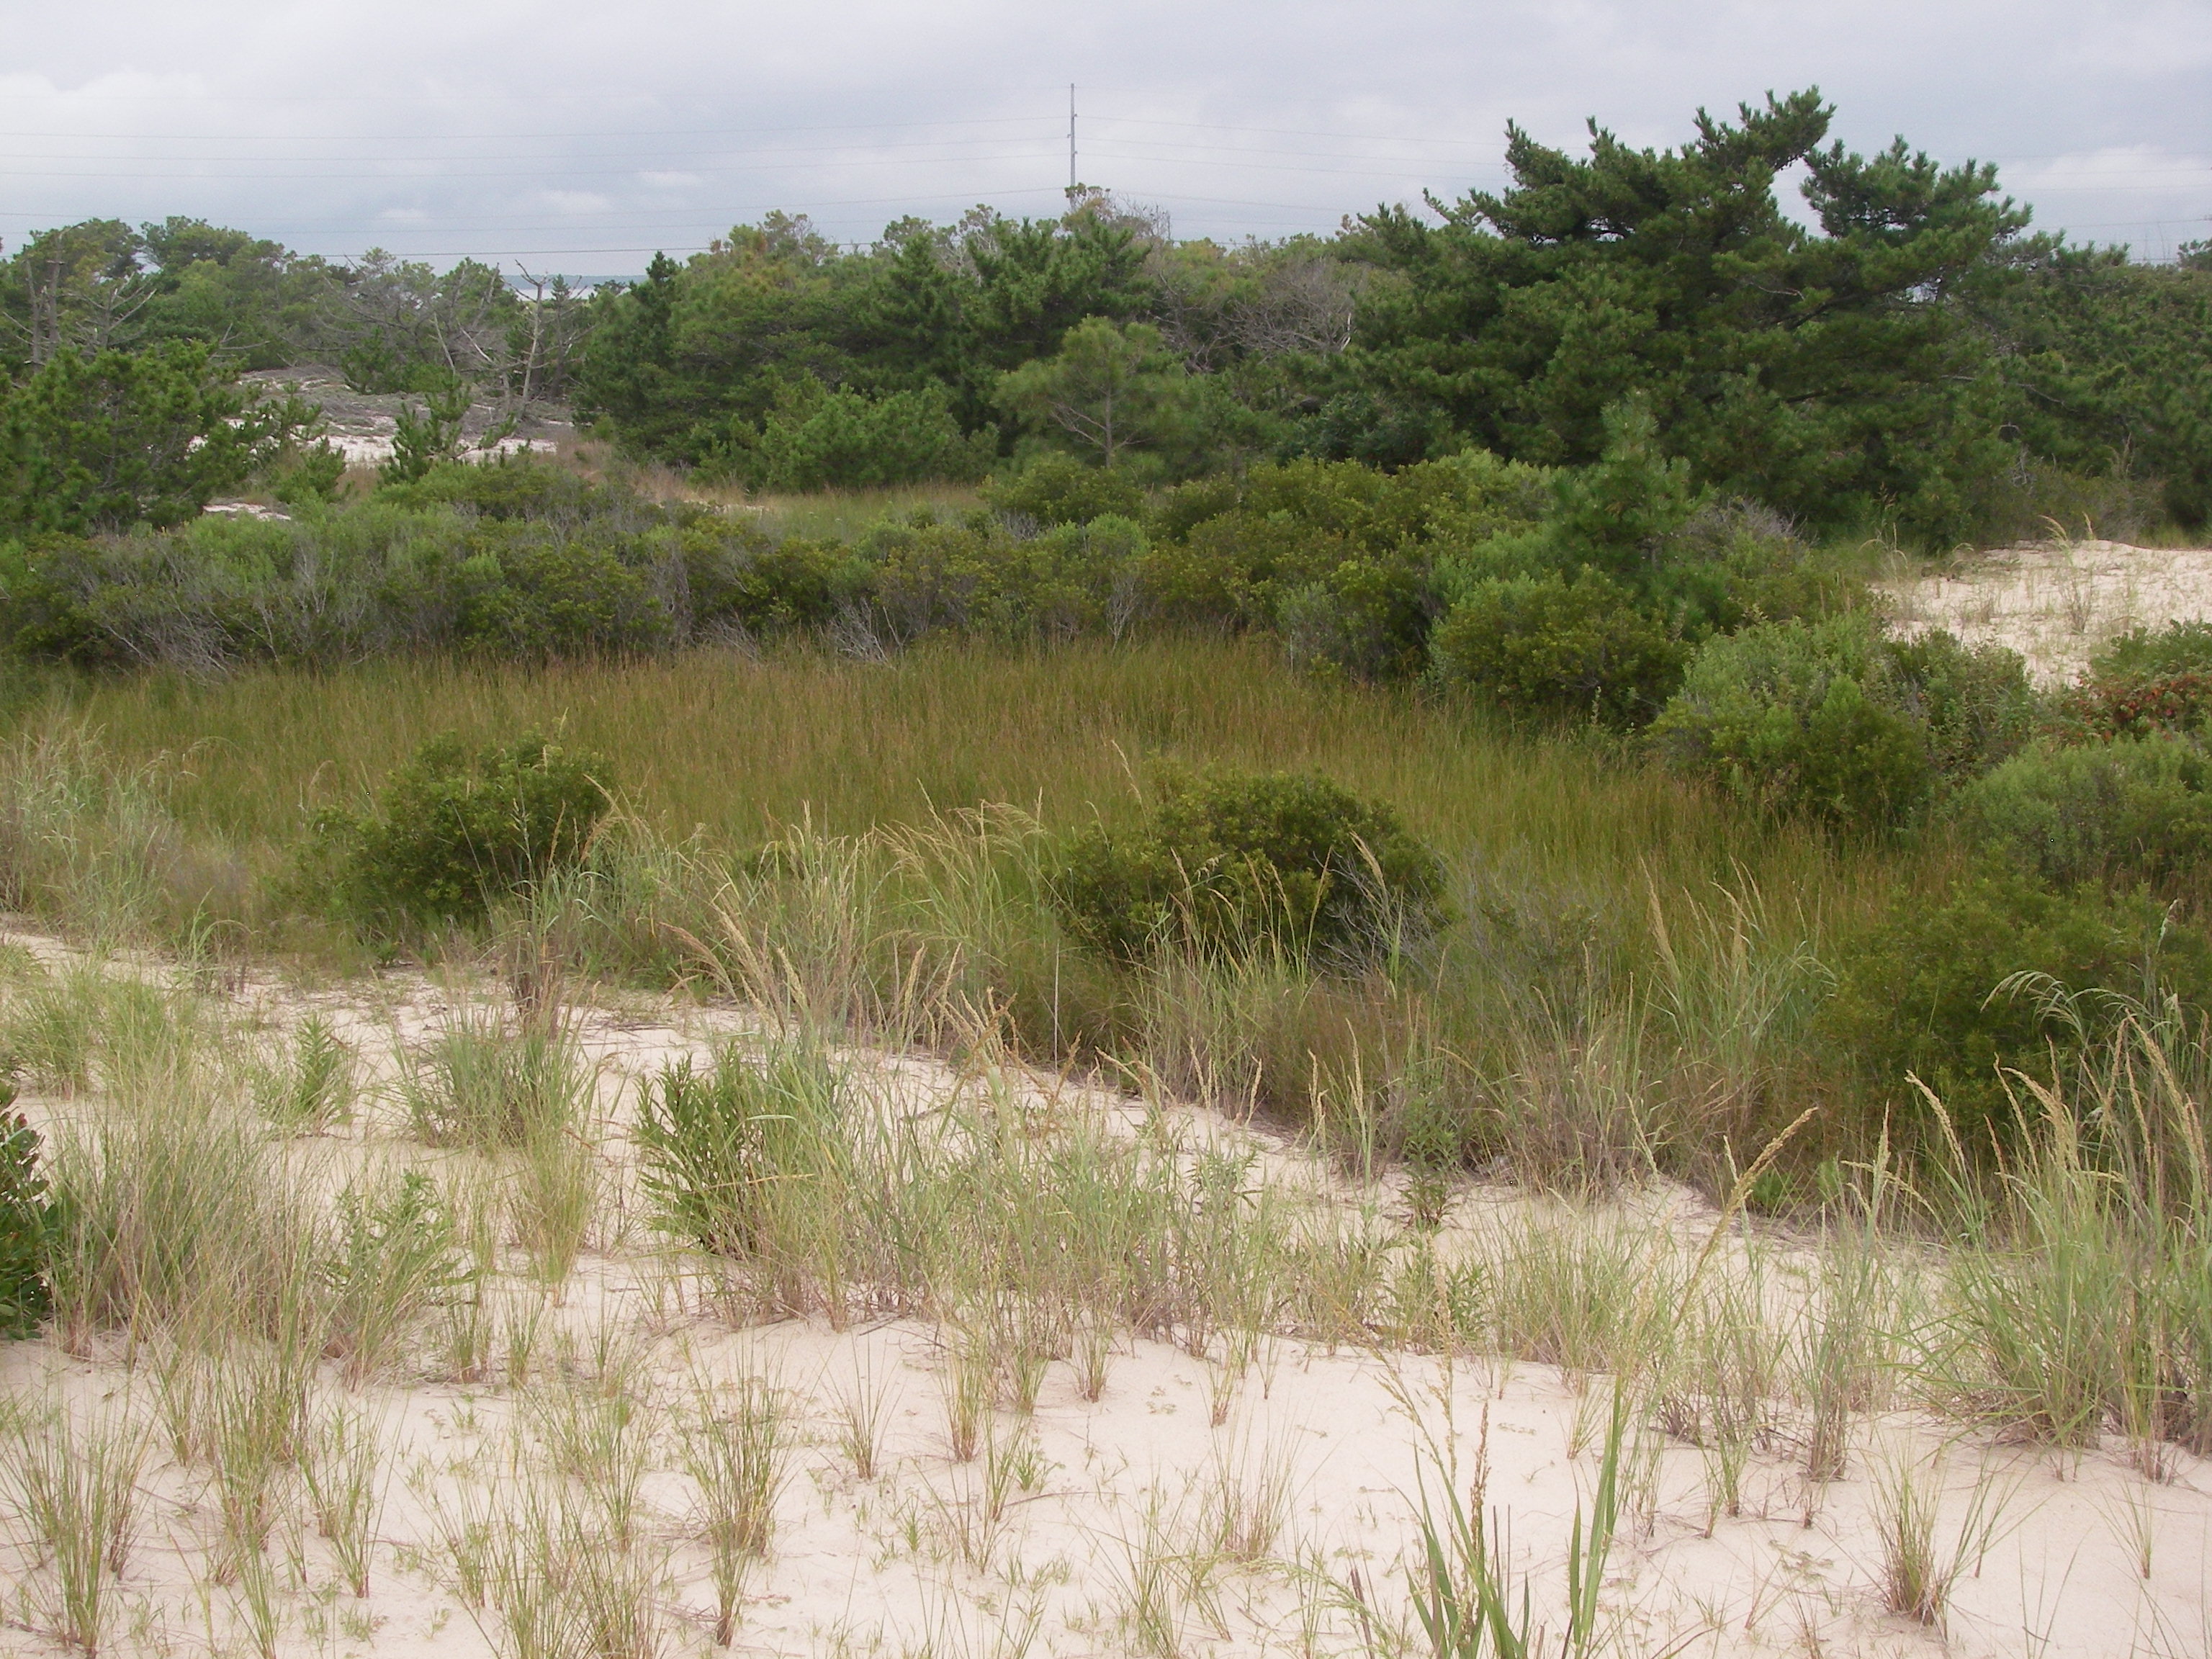 Sand, shrubs, and beach grass pepper this landscape of gentle inclines and dips.